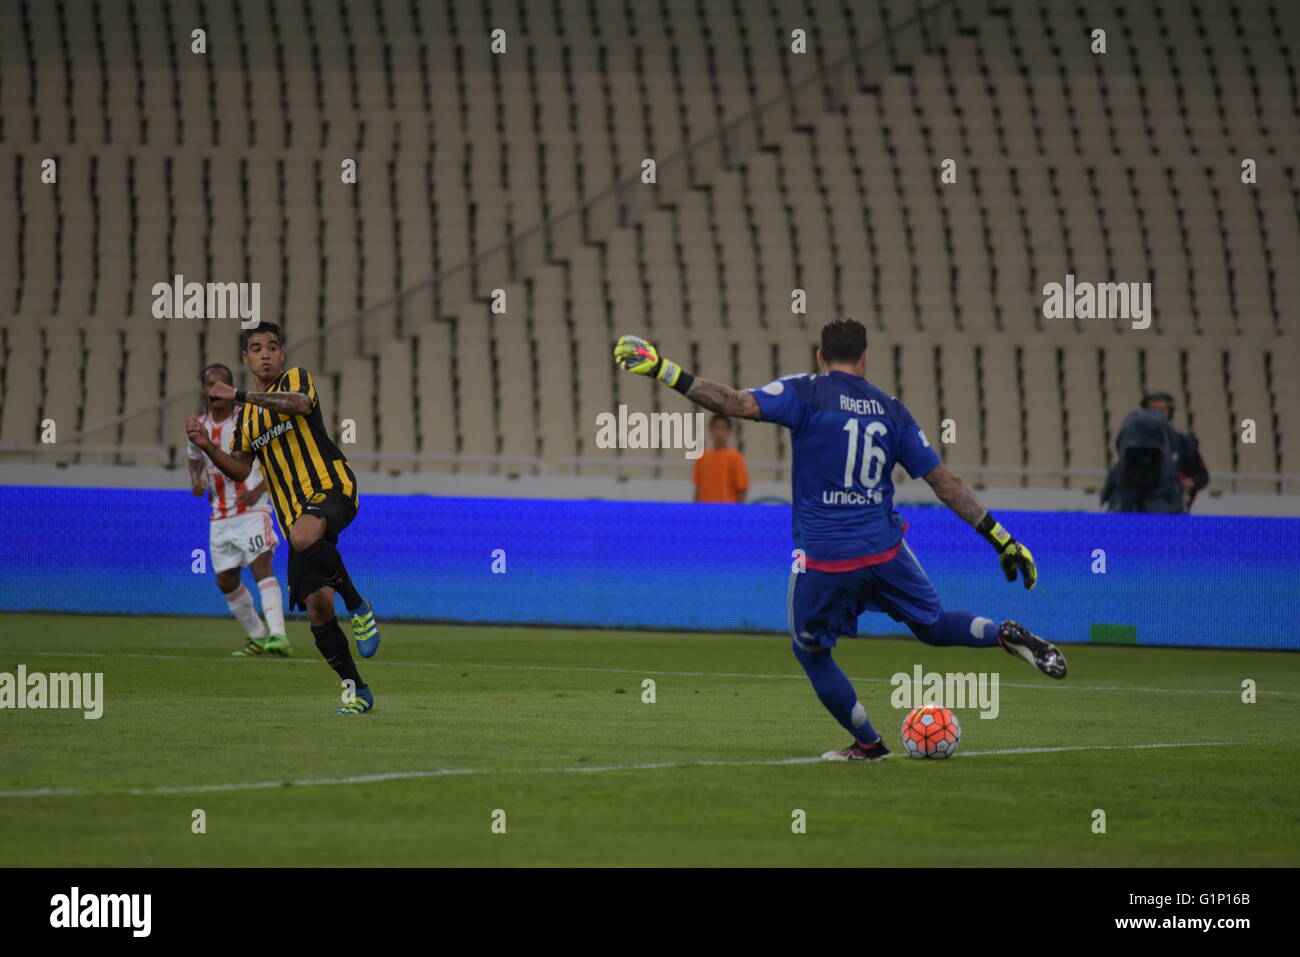 Ronald Vargas of AEK (left) tries to stop the attempt of the goalkeeper of  Olympiacos Roberto (right) to throw away the ball during Greek Football Cup  Final. AEK beats Olympiacos, 2-1. (Photo